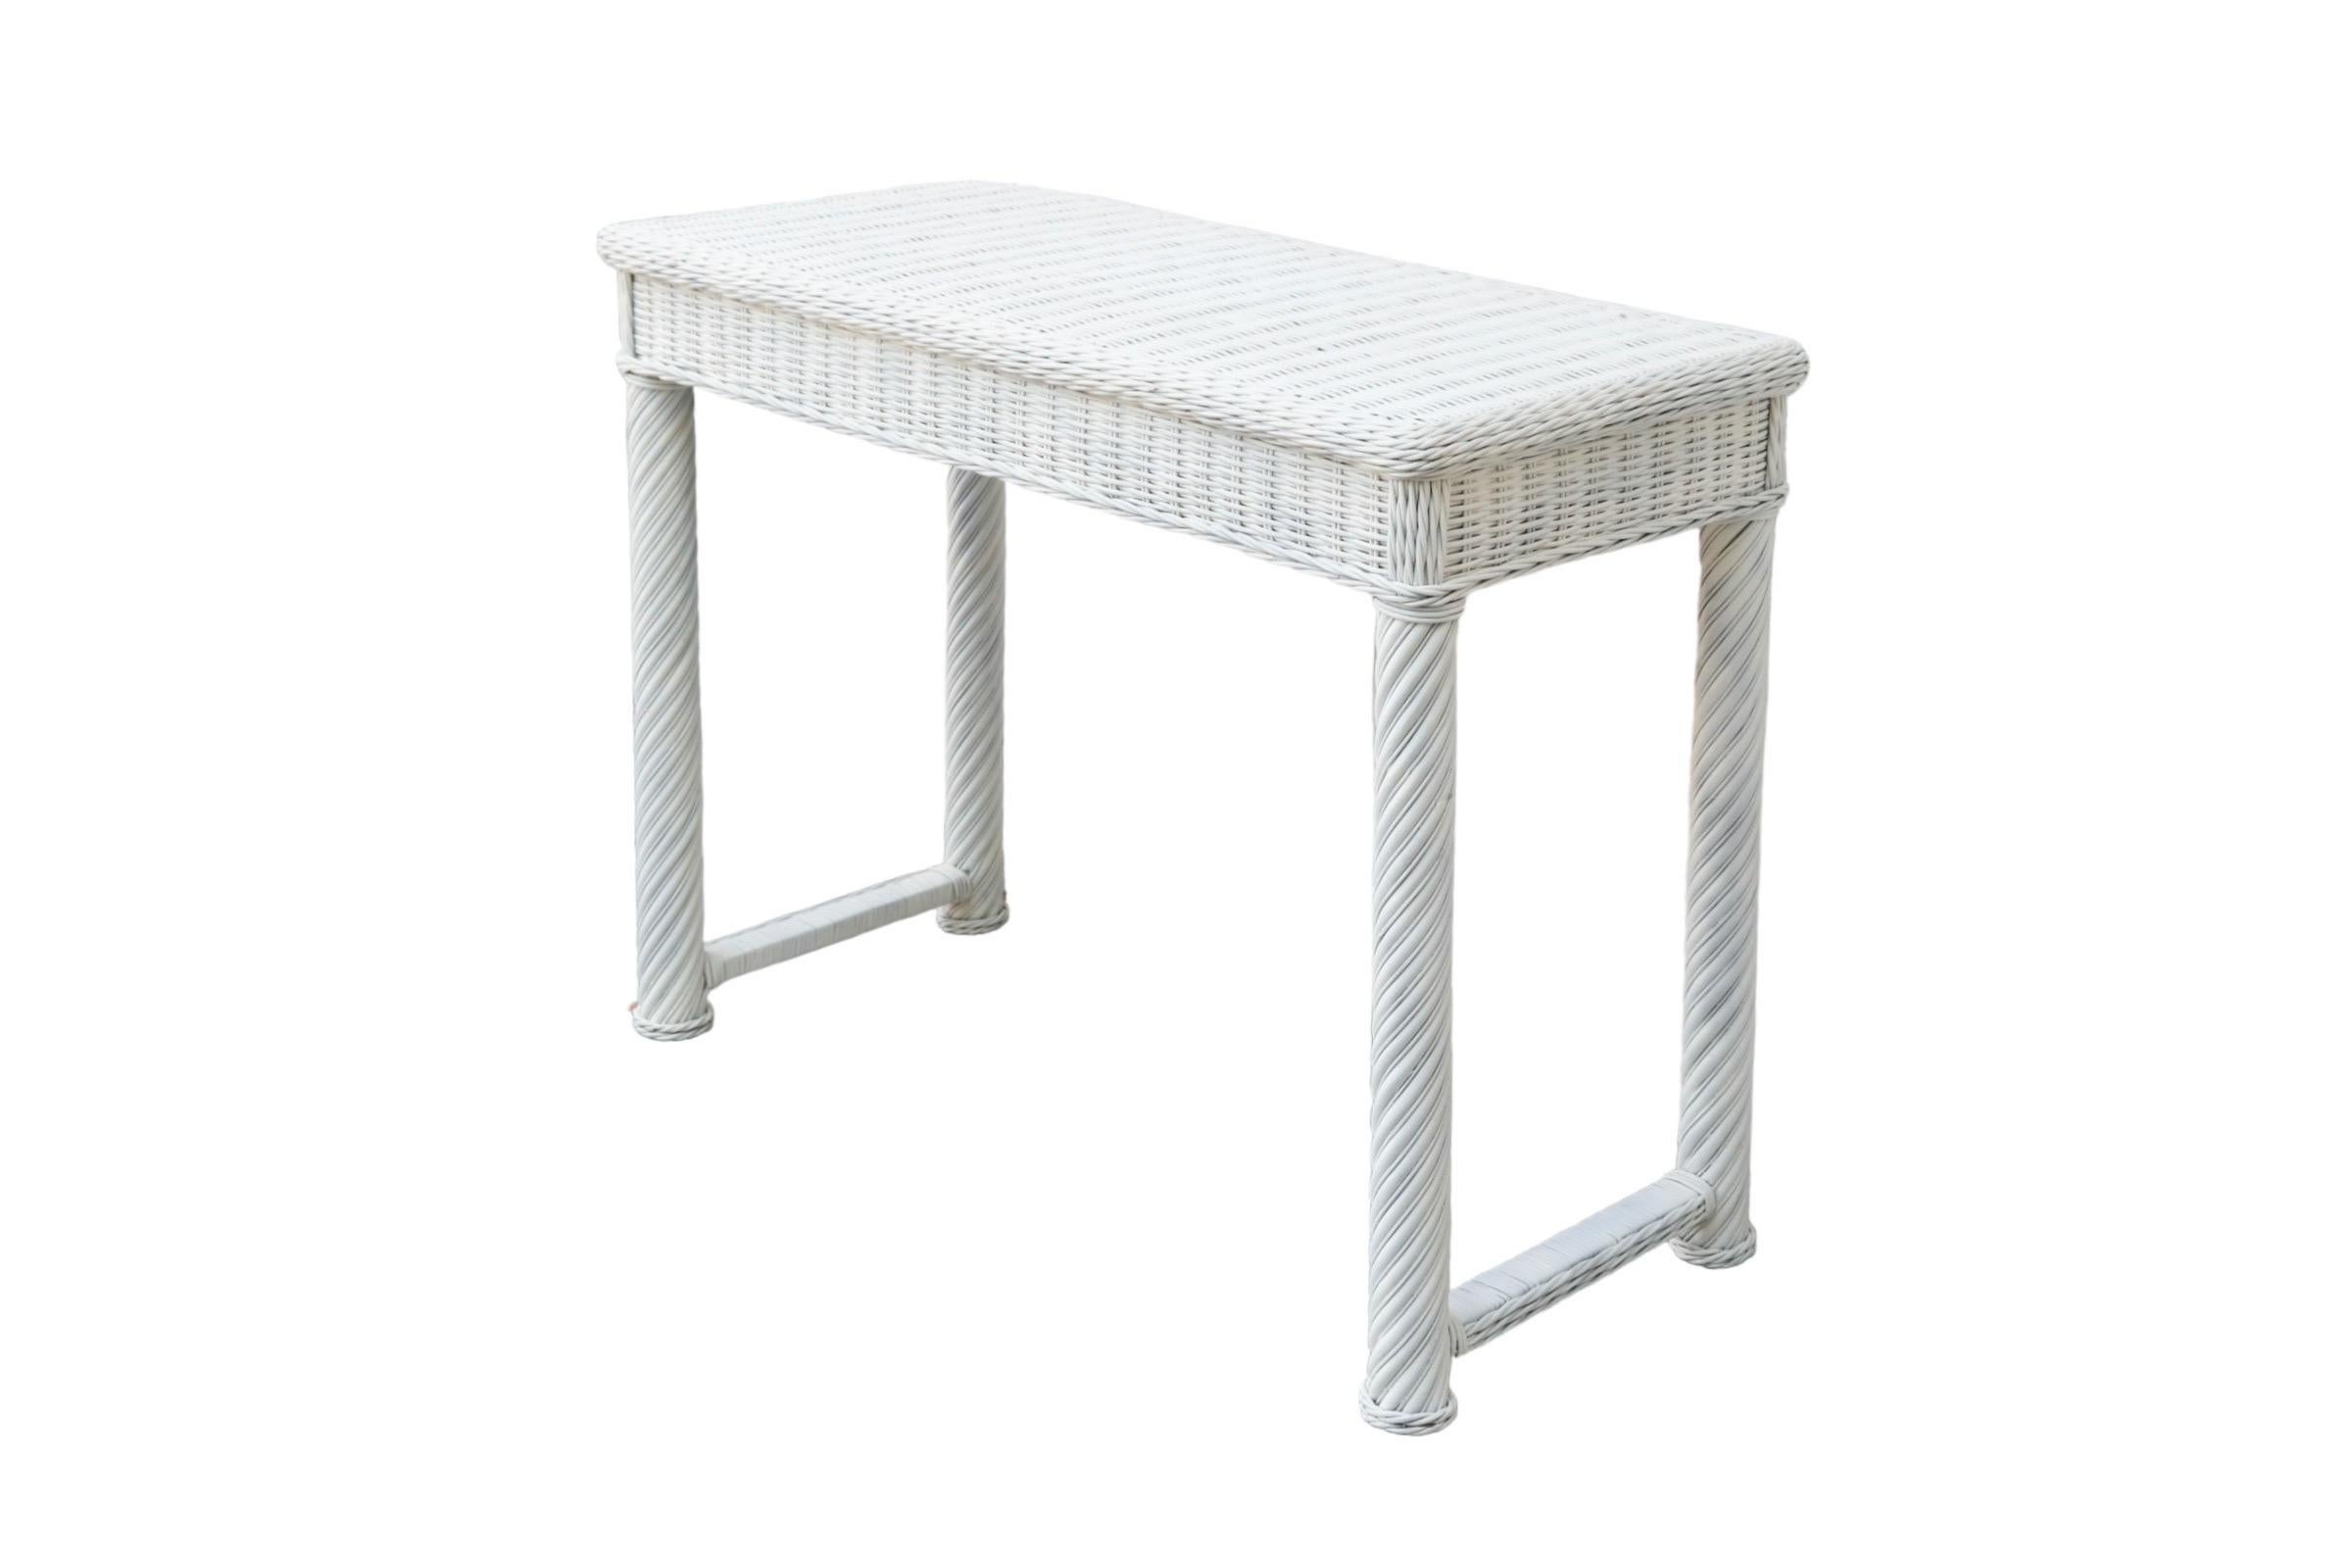 A white wicker woven hall table made of rattan. The table top is framed with a braided edge, and wooden legs and stretchers at each end are wrapped with rattan. Painted white throughout.